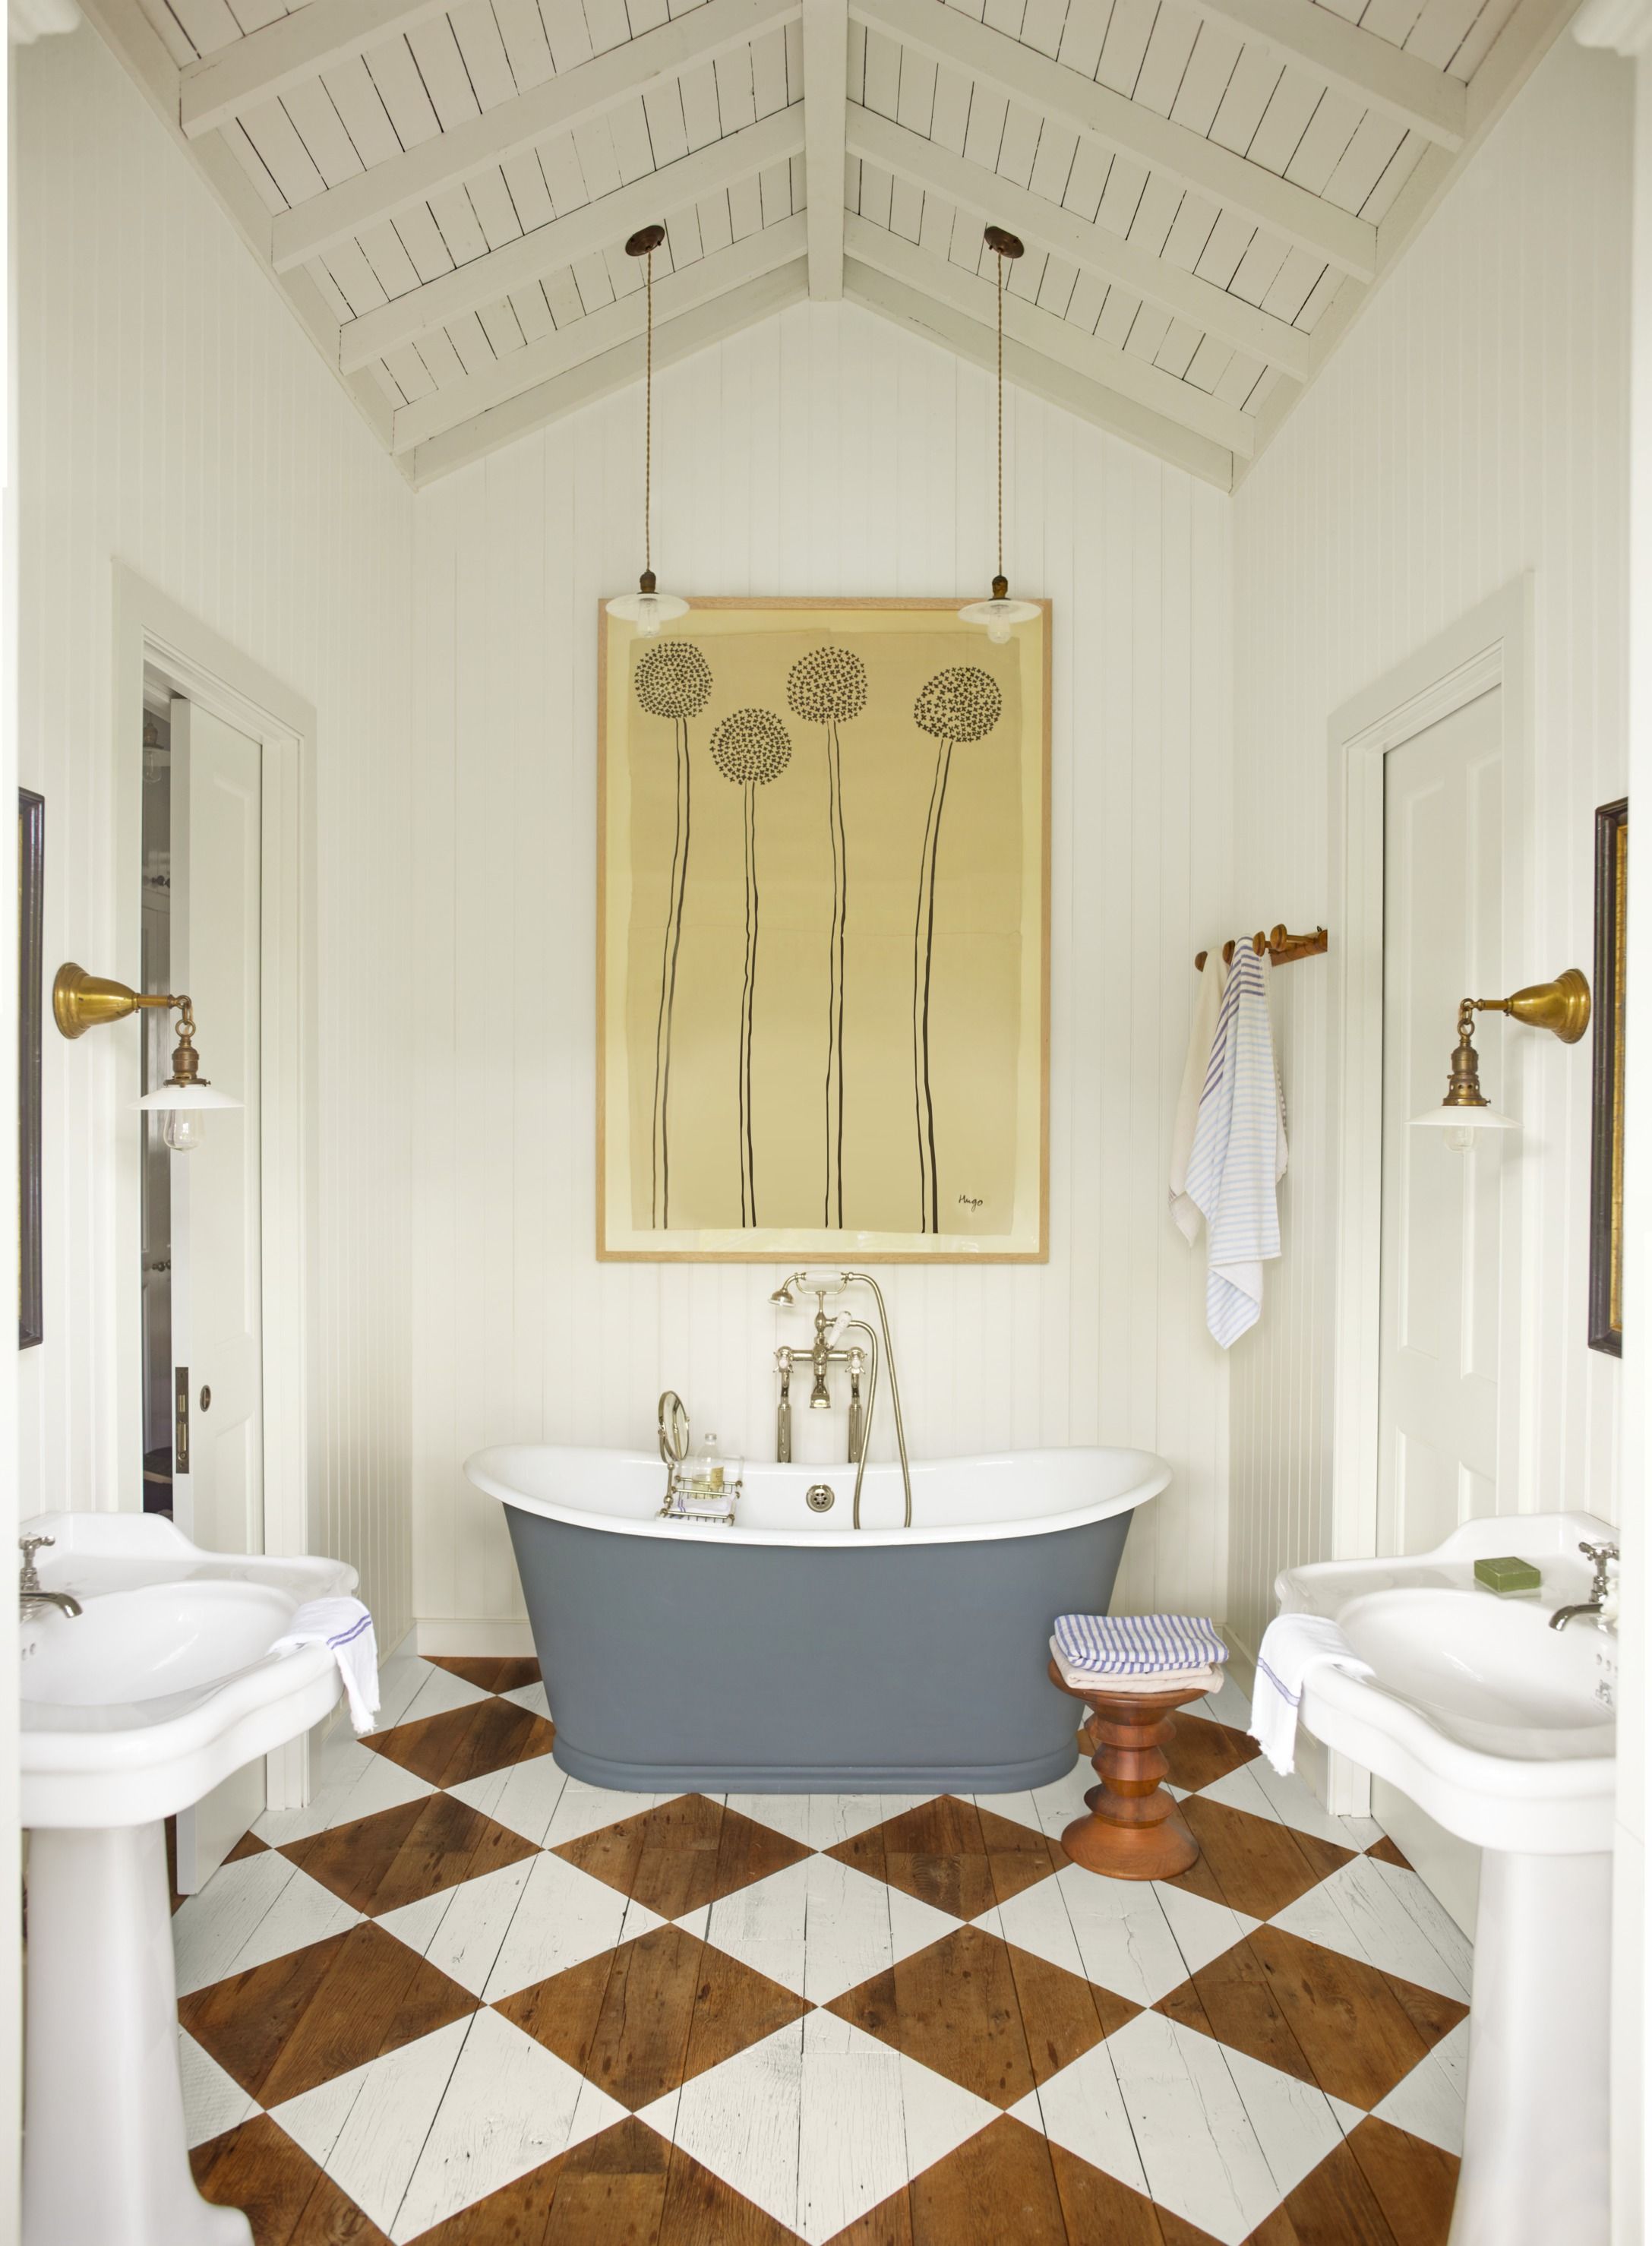 Beautiful Bathroom Decorating Ideas - 13 Pretty Small Bathroom Decorating Ideas You Ll Want To Copy Small Bathroom Decor Small Bathroom Makeover Small Bathroom Remodel / Consider hanging a simple, round vanity mirror, installing an unconventional vessel sink, and highlighting your space with other ultramodern fixtures and features.